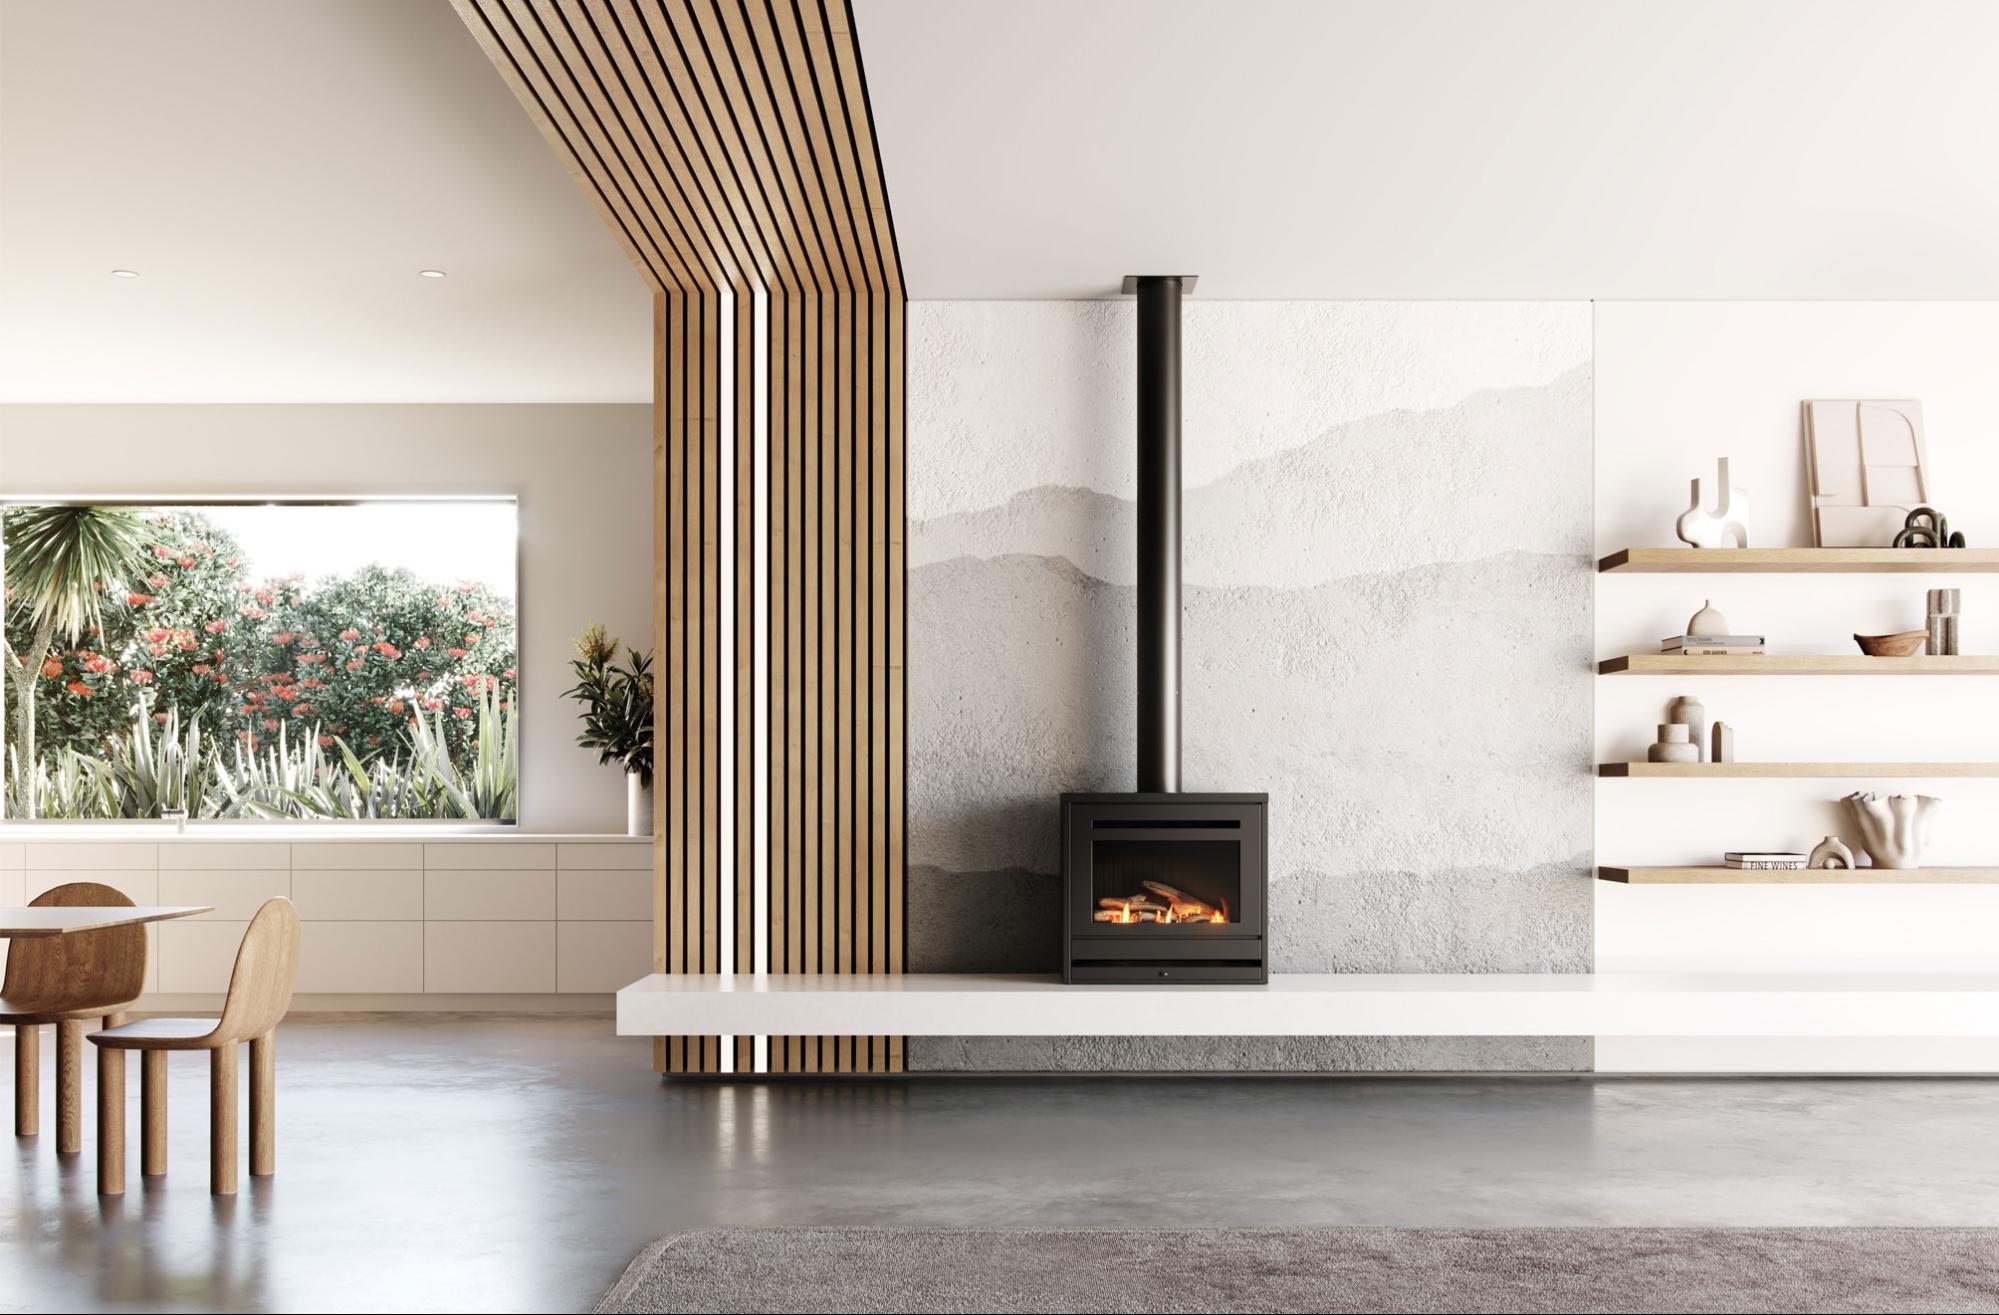 The warmth of gas fires - why they're worth it